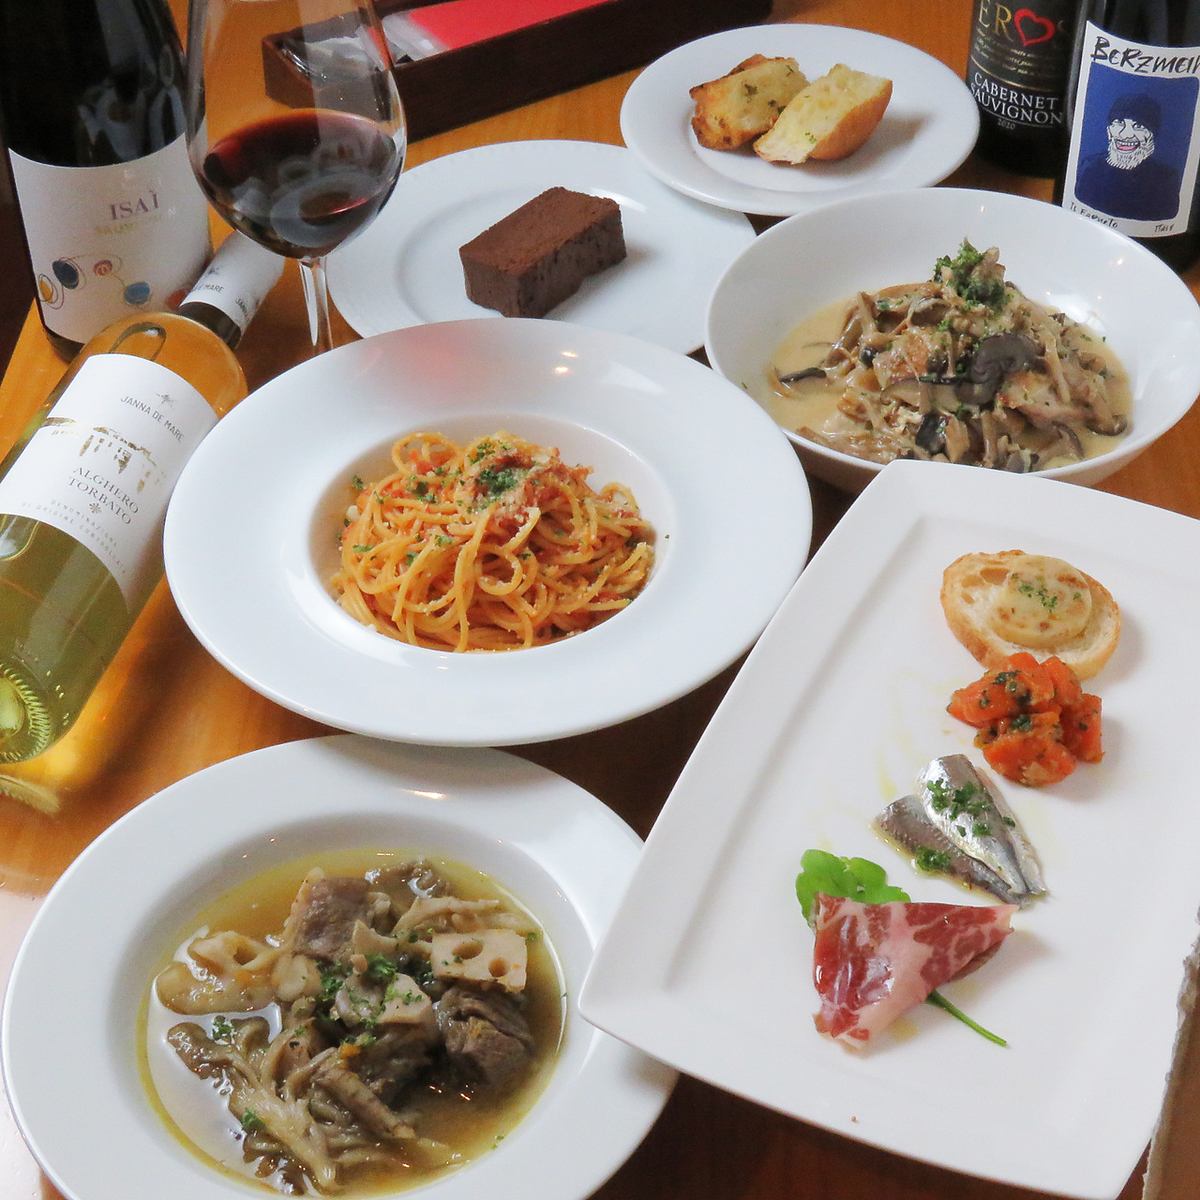 A casual Italian restaurant where you can enjoy carefully selected dishes that bring out the flavor of seasonal ingredients and a wide selection of wines.